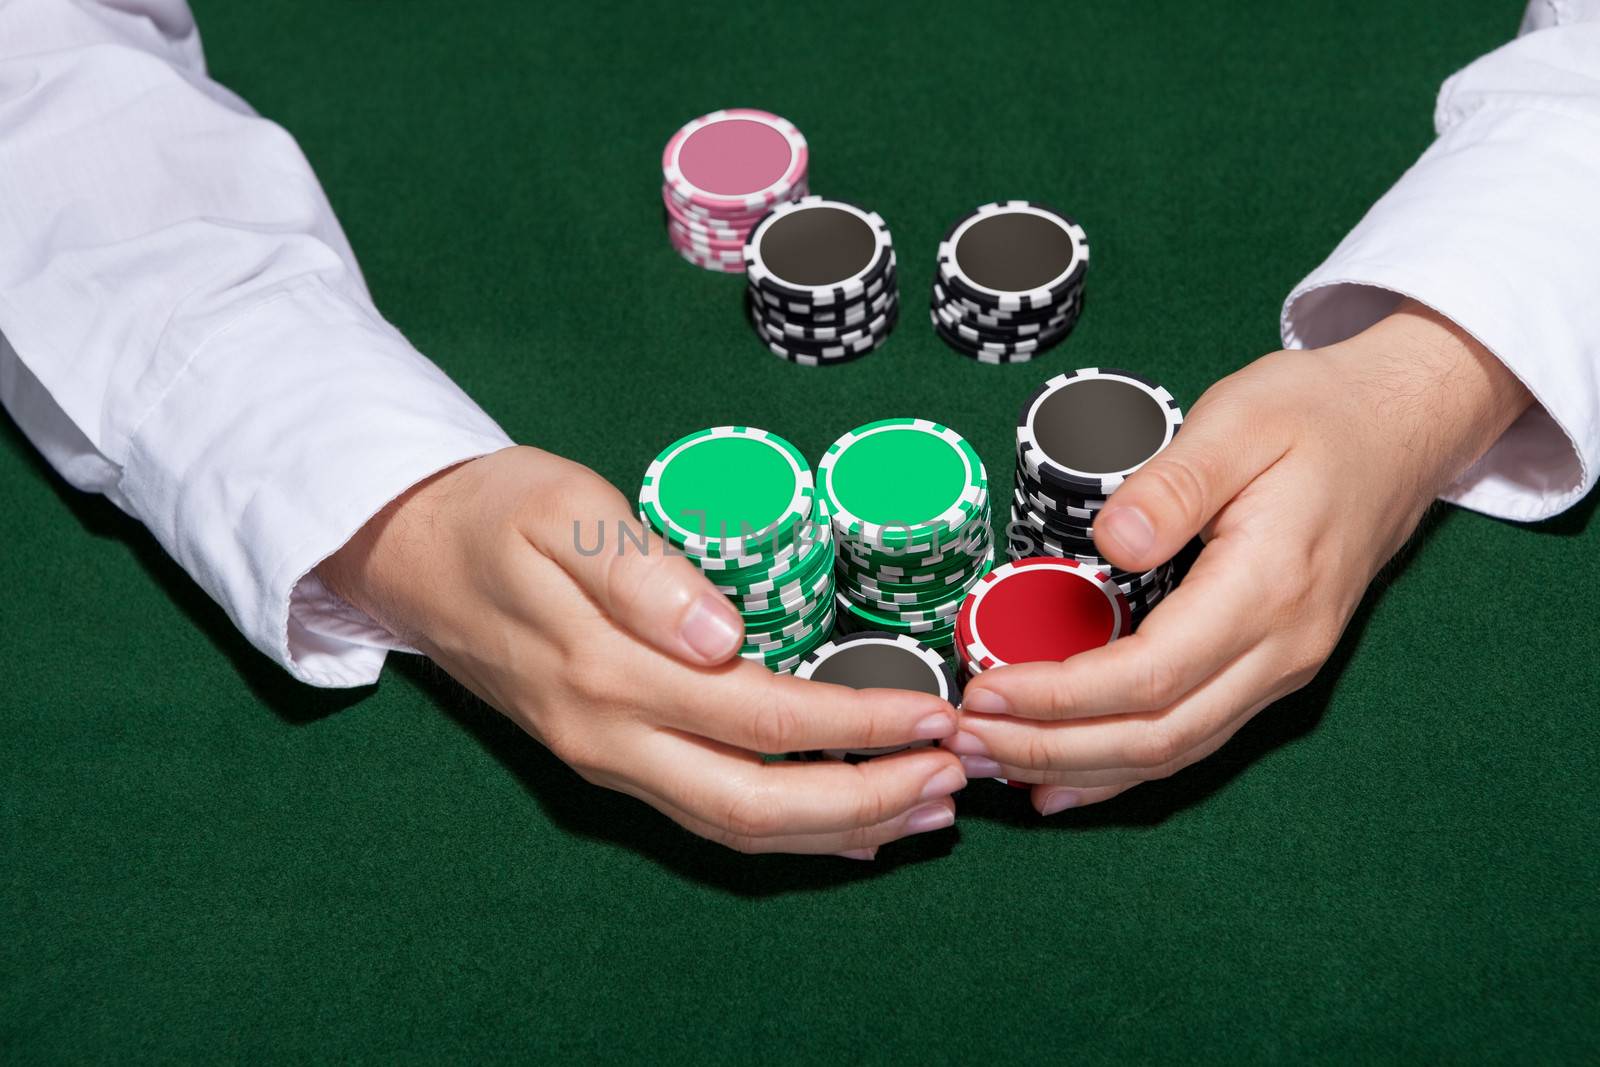 Croupier collecting in the bets at a casino table with his hands encircling various stacks of tokens or chips